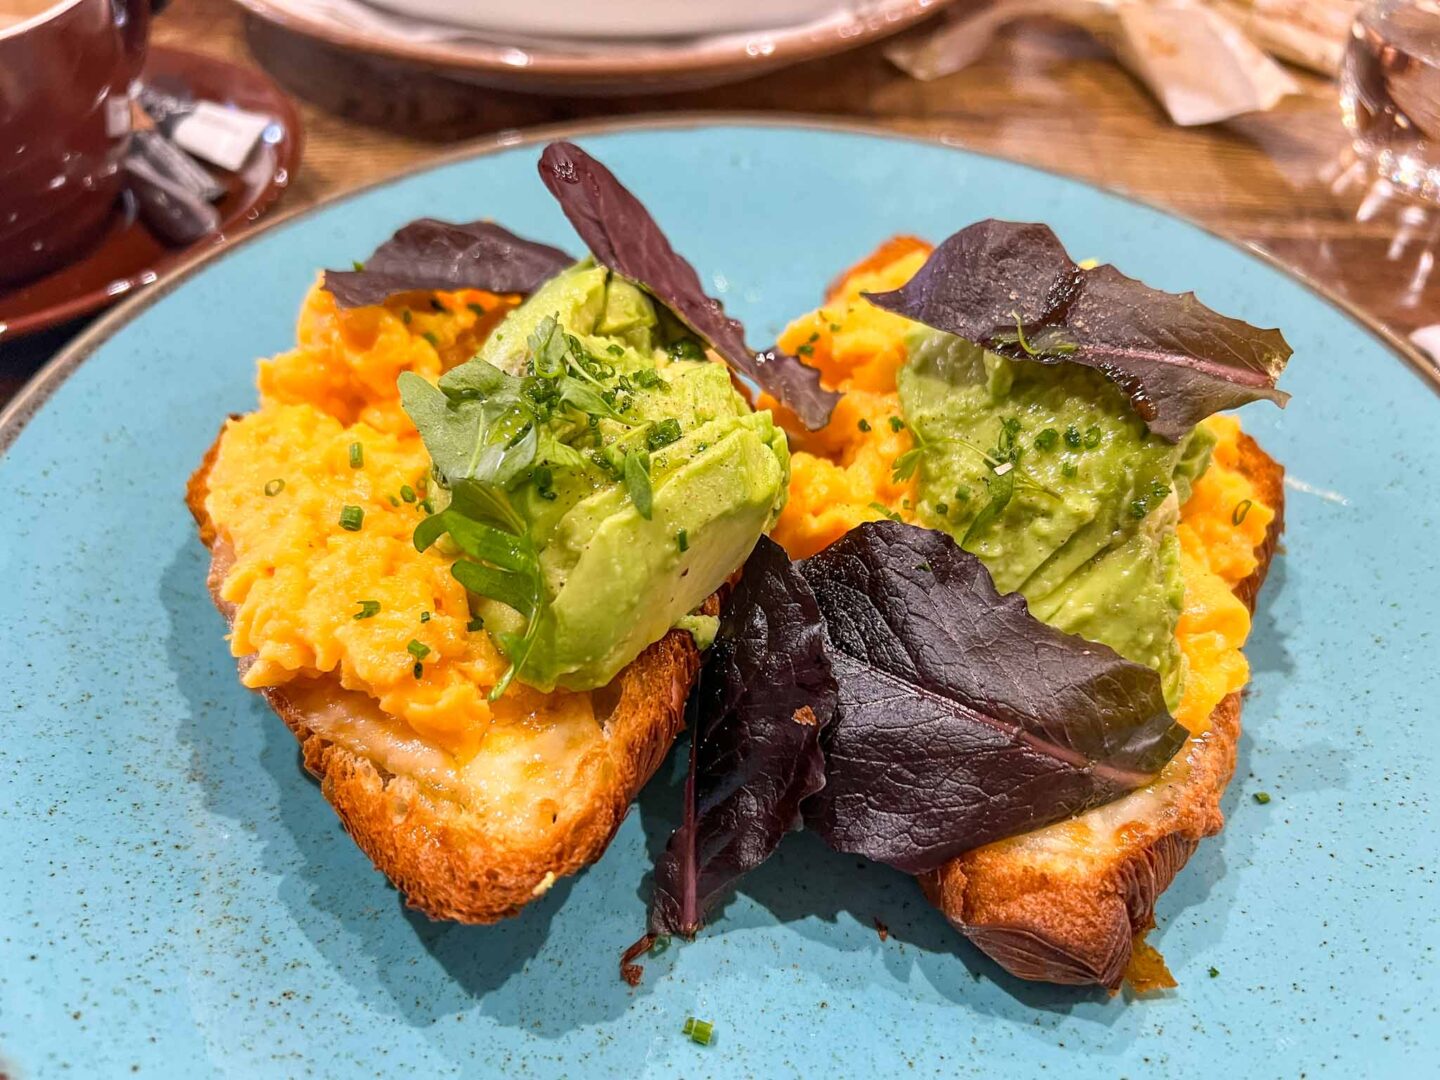 Halal brunch manchester,  Croissant with Egg and Avocado at Damo Altrincham